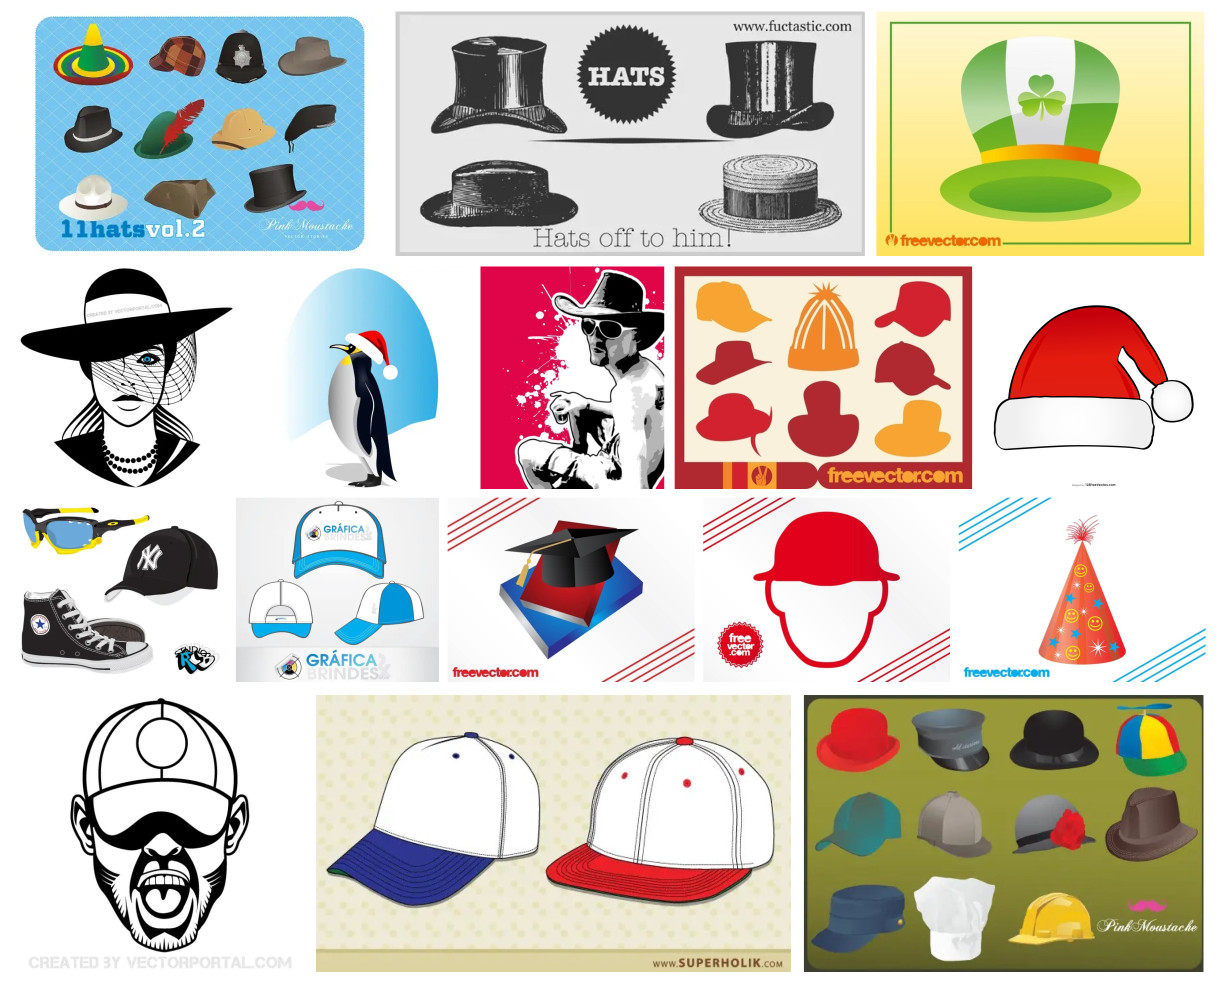 Diverse Vectors of Hats and Accessories: Unorthodox Collection